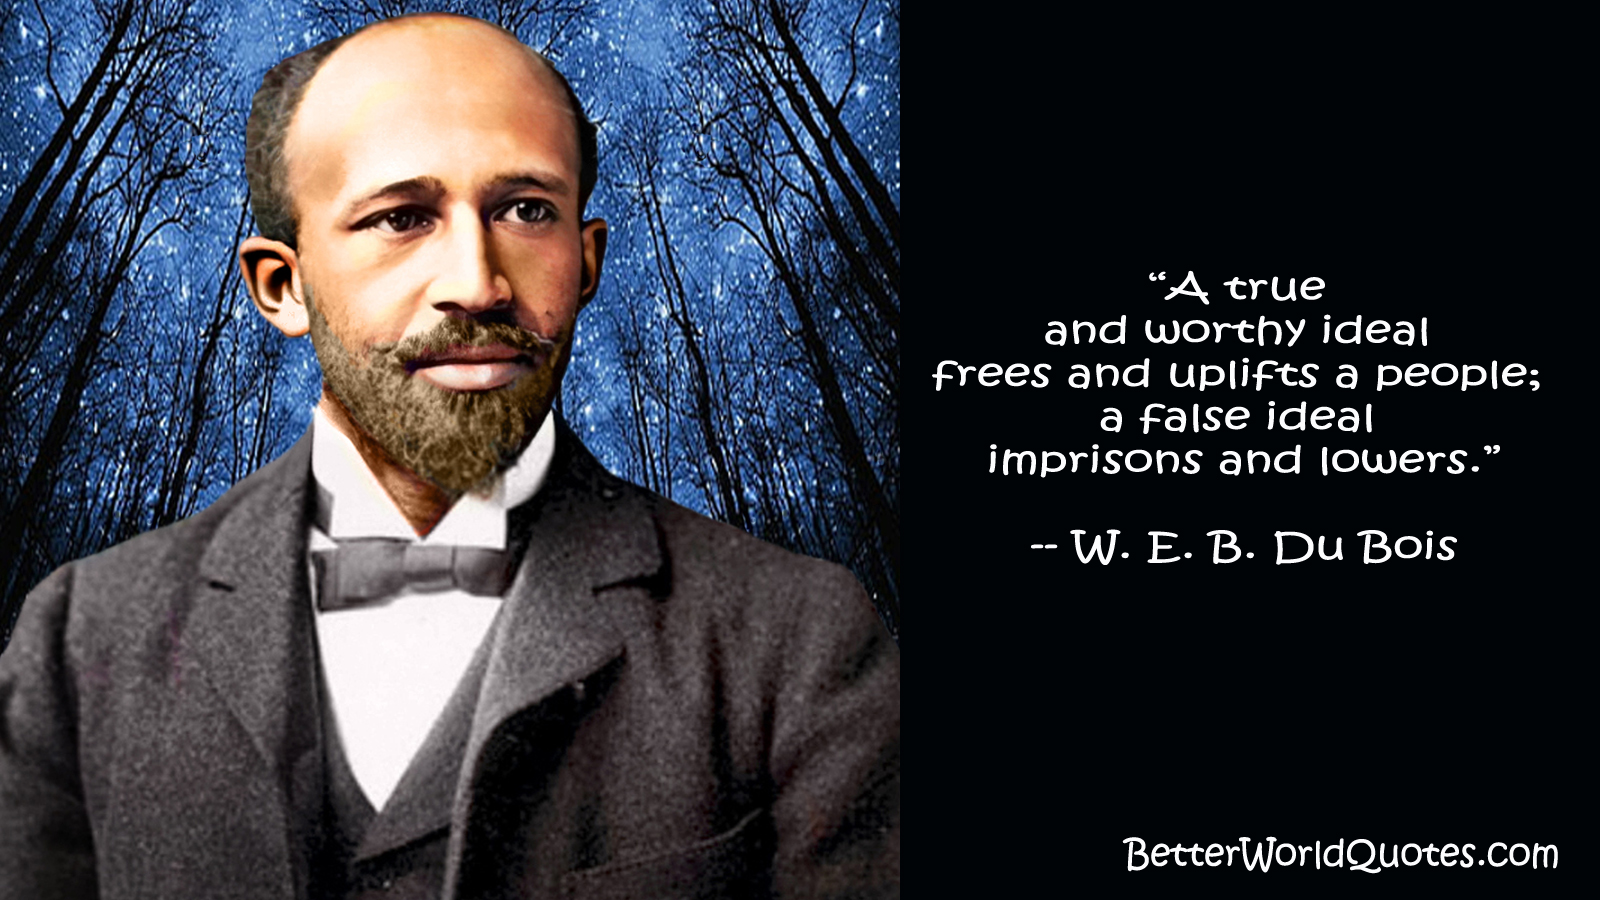 W. E. B. Du Bois: A true and worthy ideal frees and uplifts a people; a false ideal imprisons and lowers